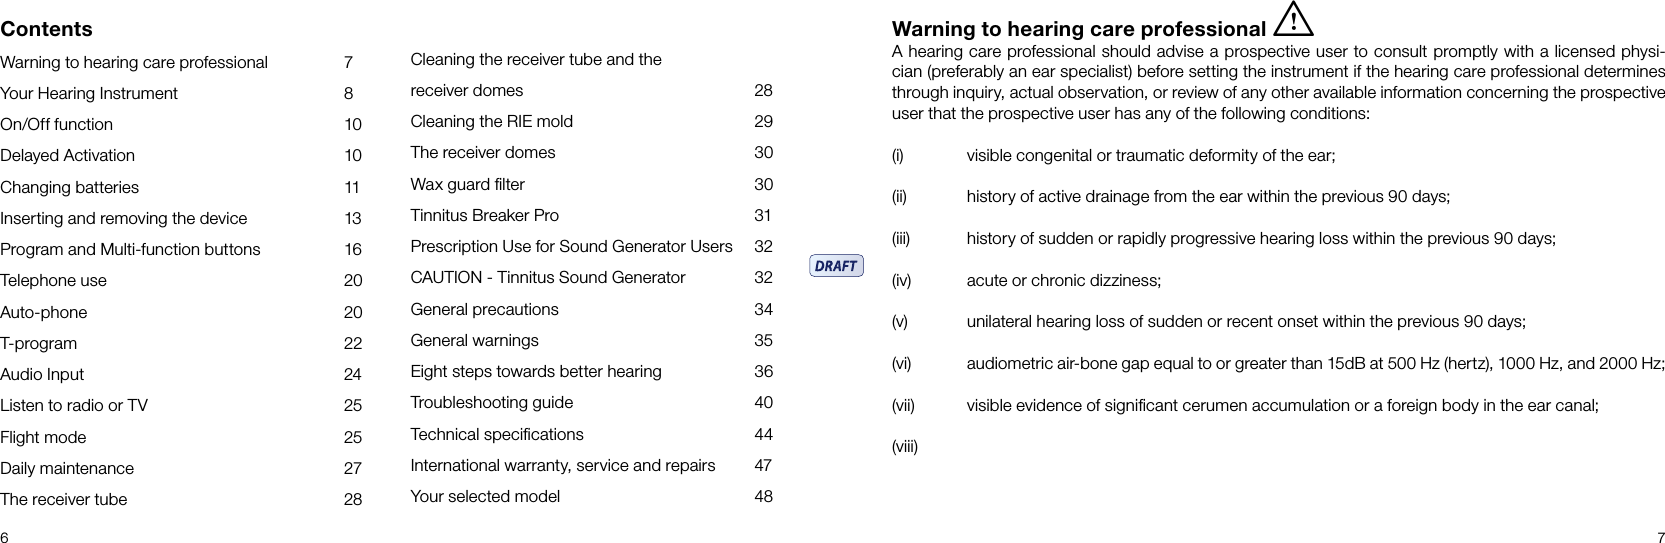 6 7ContentsWarning to hearing care professional  7Your Hearing Instrument  8On/Off function  10Delayed Activation  10Changing batteries  11Inserting and removing the device  13Program and Multi-function buttons  16Telephone use  20Auto-phone  20T-program  22Audio Input  24Listen to radio or TV  25Flight mode  25Daily maintenance  27The receiver tube  28Cleaning the receiver tube and the receiver domes  28Cleaning the RIE mold  29The receiver domes  30Wax guard ﬁlter  30Tinnitus Breaker Pro   31Prescription Use for Sound Generator Users   32CAUTION - Tinnitus Sound Generator   32General precautions  34General warnings  35Eight steps towards better hearing  36Troubleshooting guide  40Technical speciﬁcations  44International warranty, service and repairs  47Your selected model  48Warning to hearing care professional iA hearing care professional should advise a prospective user to consult promptly with a licensed physi-cian (preferably an ear specialist) before setting the instrument if the hearing care professional determines through inquiry, actual observation, or review of any other avail able information concerning the prospective user that the prospective user has any of the following conditions:(i)  visible congenital or traumatic deformity of the ear;(ii)  history of active drainage from the ear within the previous 90 days;(iii)   history of sudden or rapidly progressive hearing loss within the previous 90 days;(iv)   acute or chronic dizziness;(v)   unilateral hearing loss of sudden or recent onset within the previous 90 days;(vi)   audiometric air-bone gap equal to or greater than 15dB at 500 Hz (hertz), 1000 Hz, and 2000 Hz;(vii)   visible evidence of signiﬁcant cerumen accumulation or a foreign body in the ear canal;(viii)  